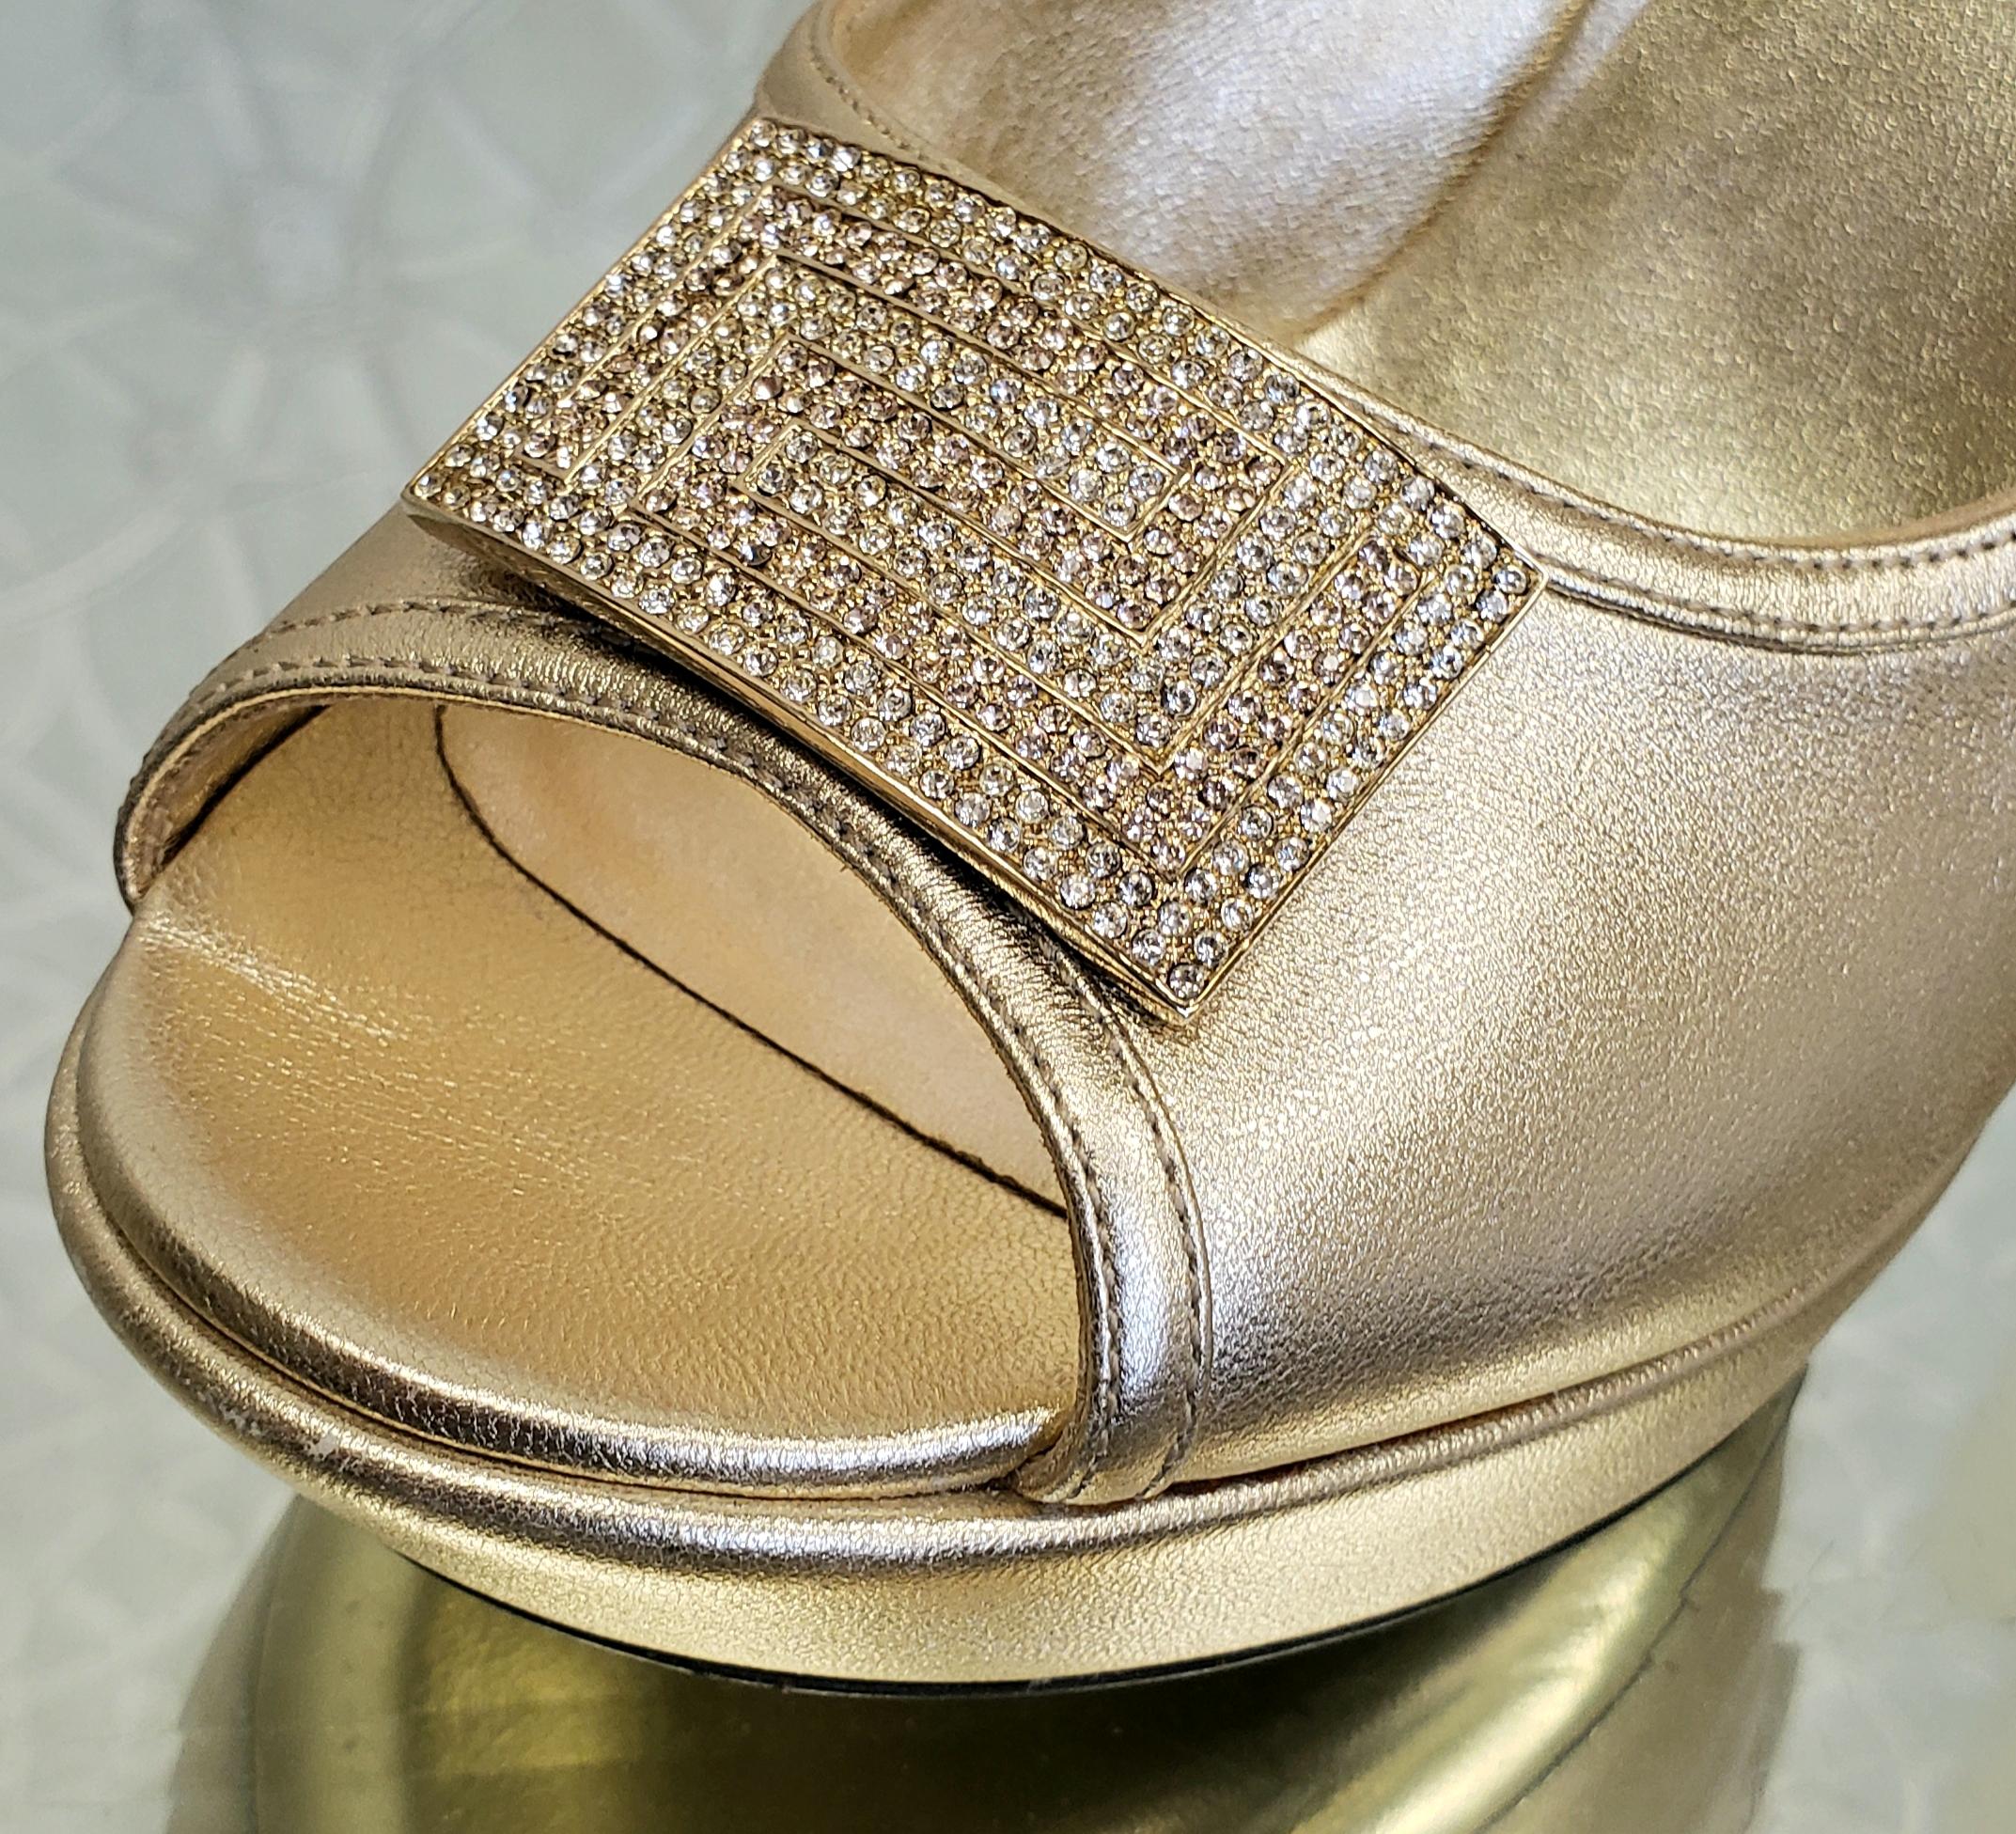 New VERSACE CRYSTAL GREEK KEY GOLD LEATHER PLATFORM SHOES 38.5 - 8.5; 41 - 11 In New Condition For Sale In Montgomery, TX